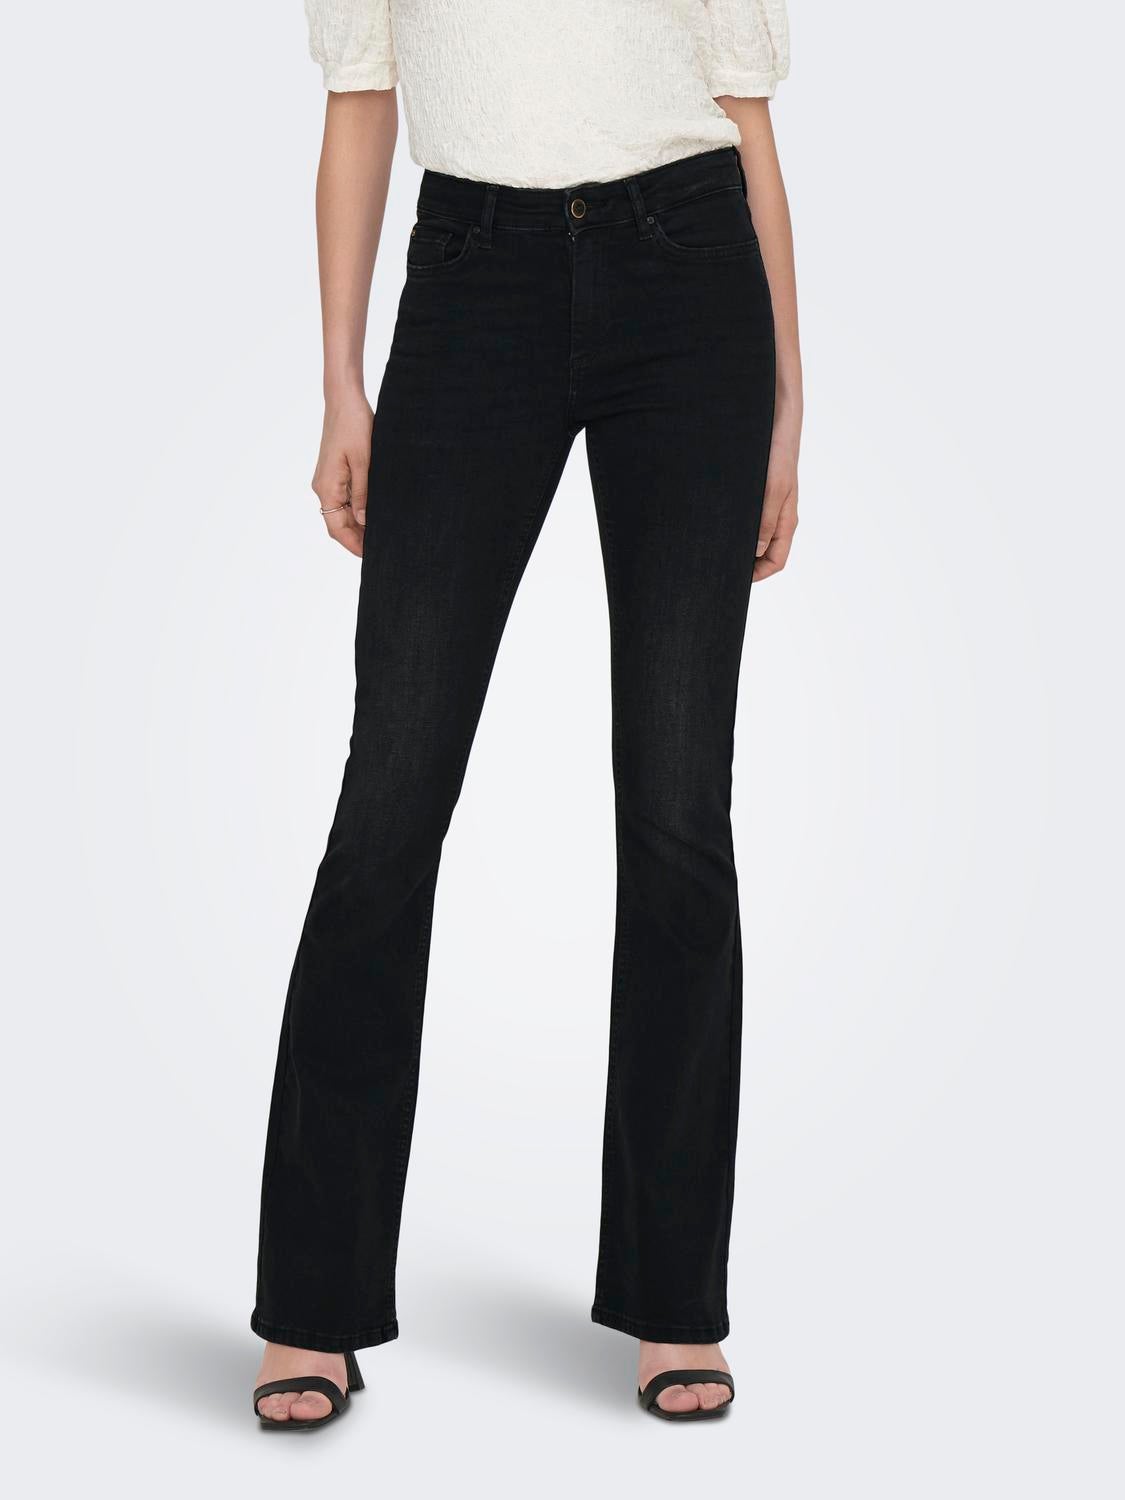 Bootcut & Flared Jeans for Women | ONLY